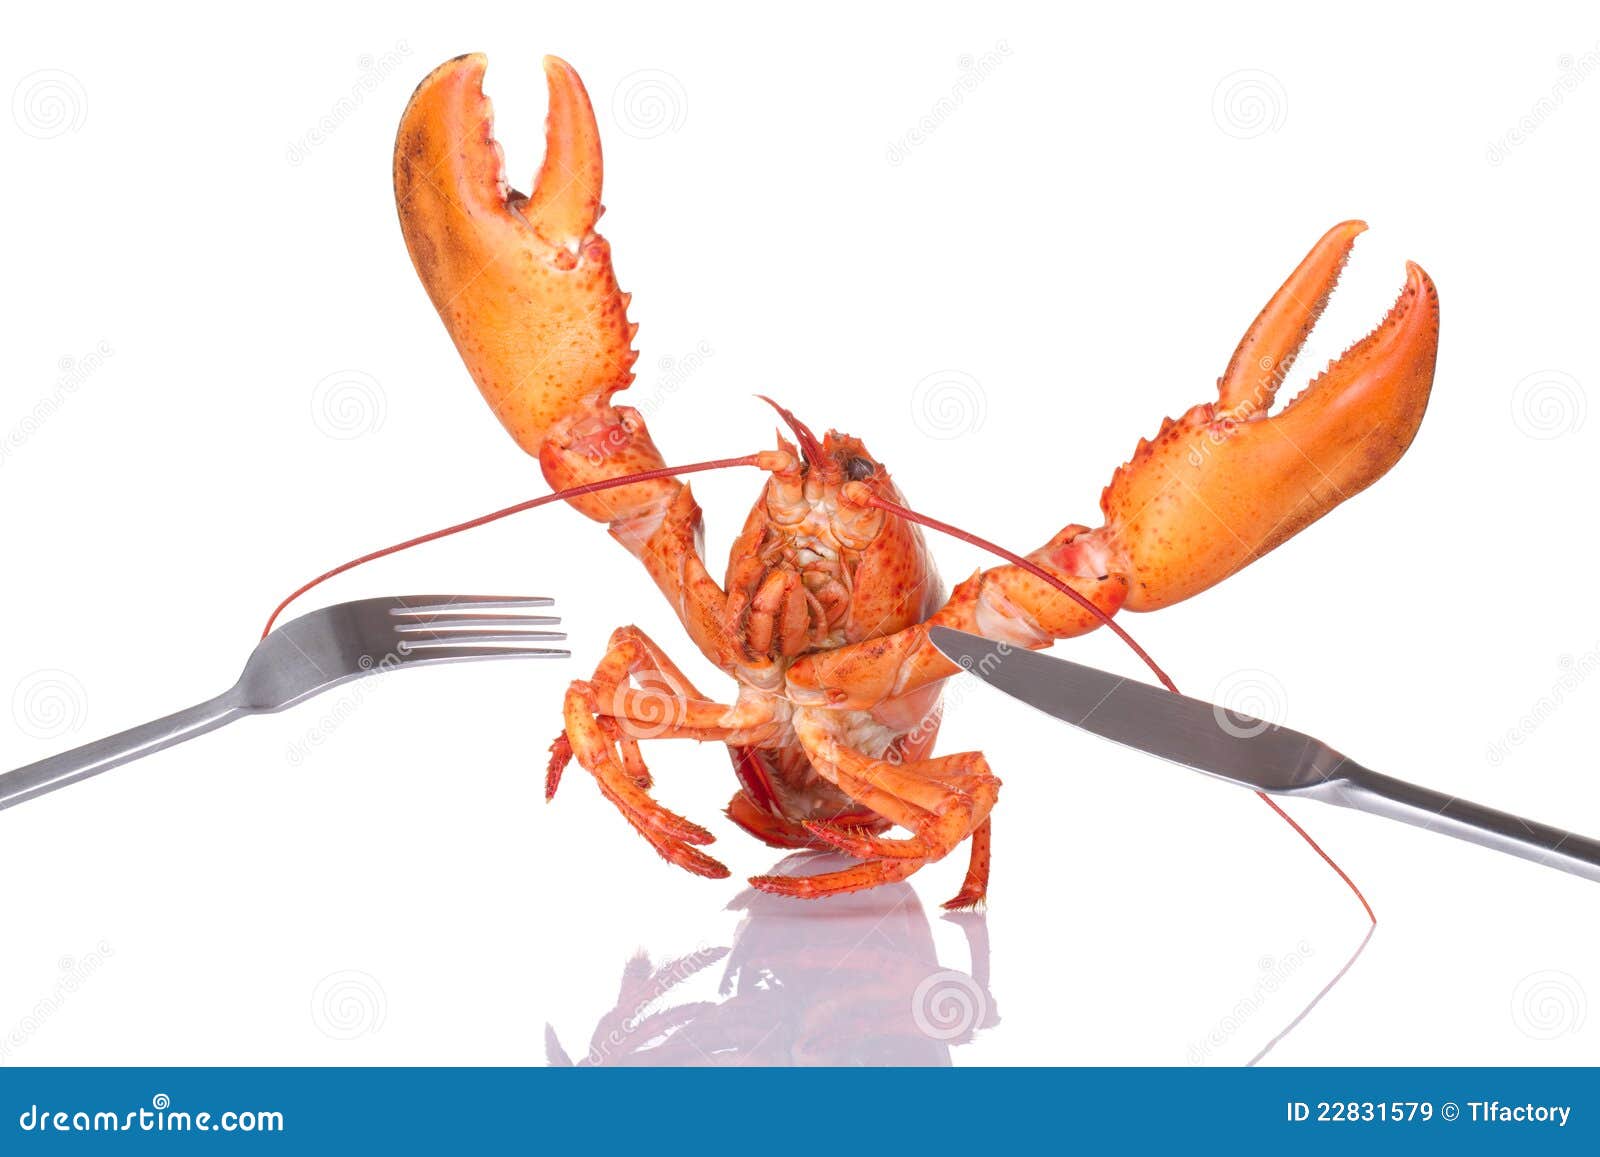 Lobster With Fork And Knife Royalty Free Stock Images ...